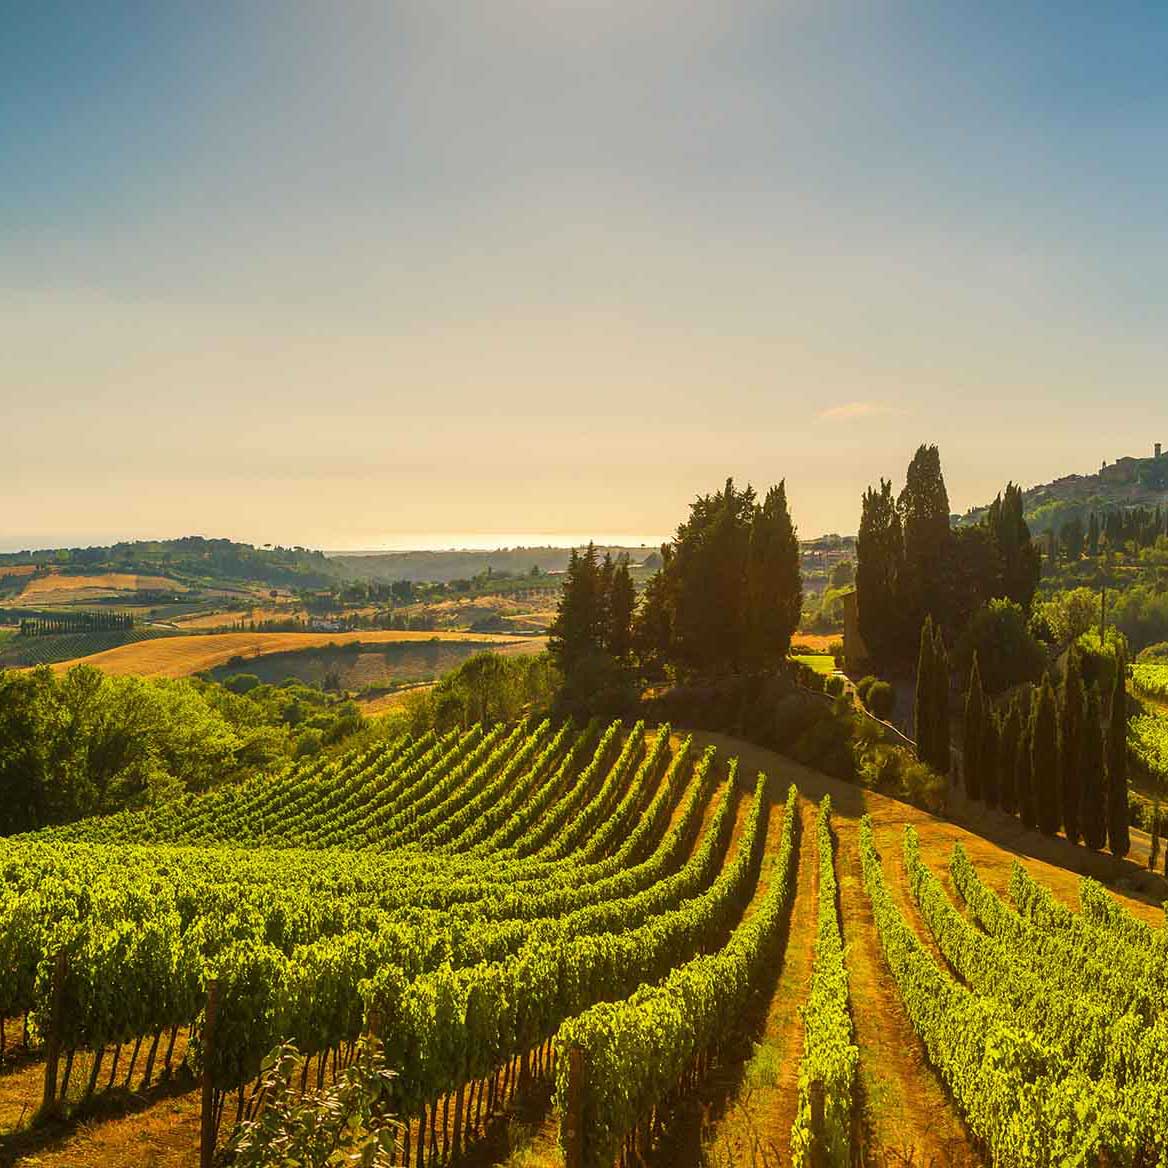 Vineyards and countryside landscape in Tuscany, Italy.